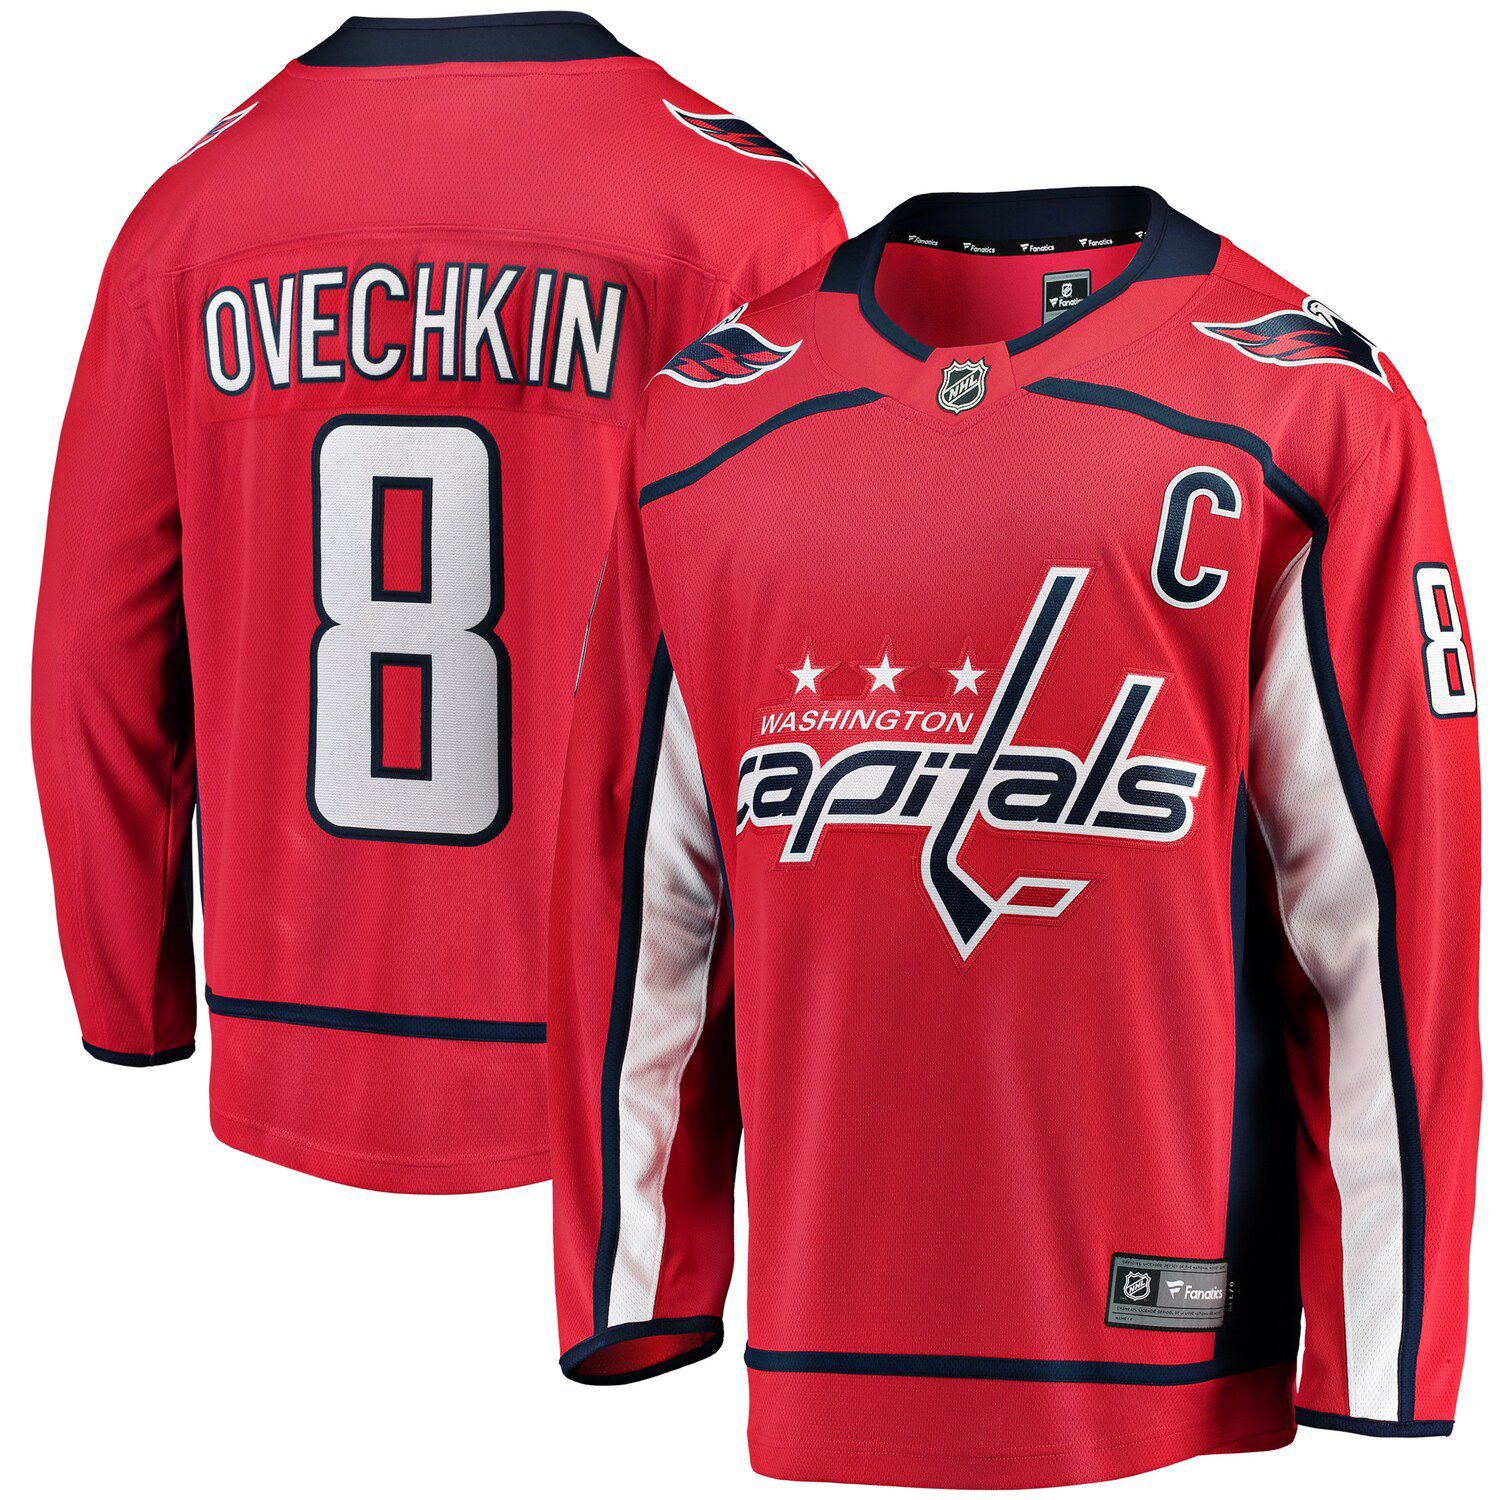 ovechkin jersey youth